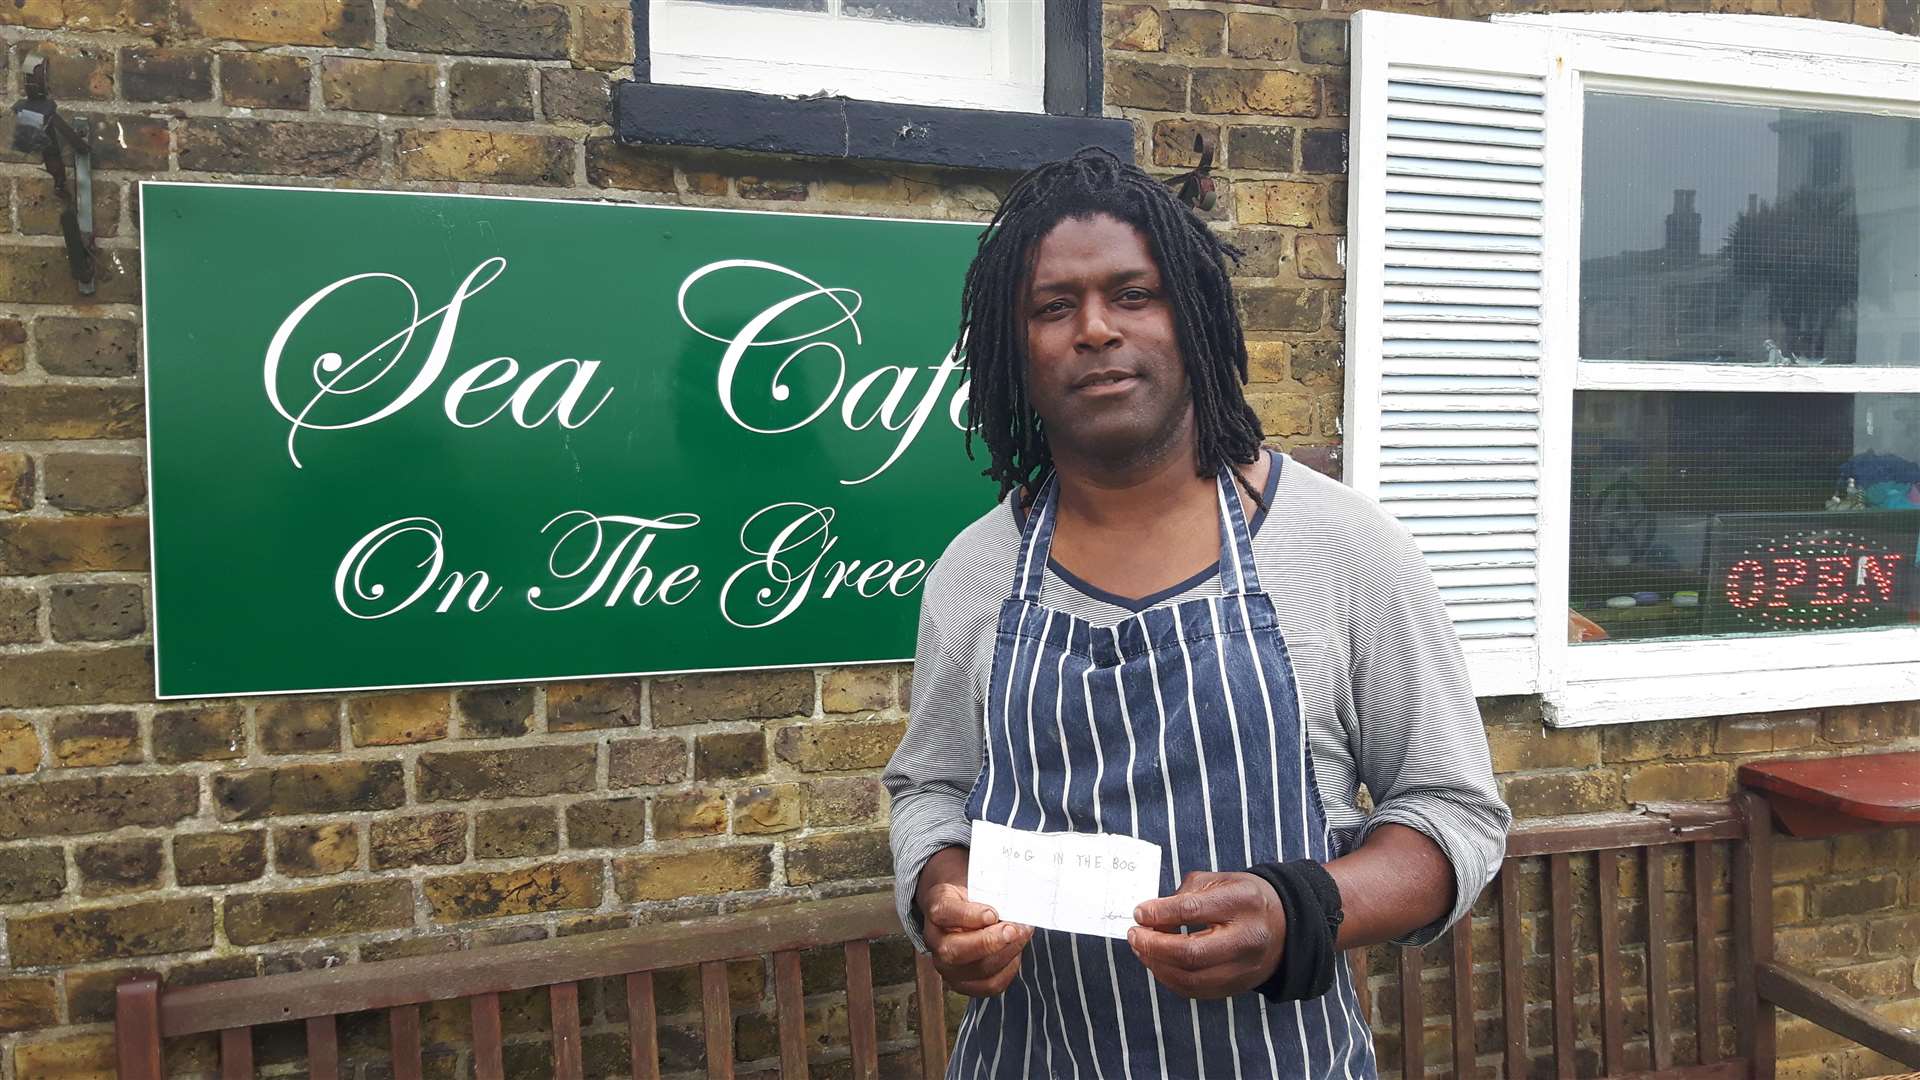 Cafe owner Peter St Ange with the note which contains the racist nickname